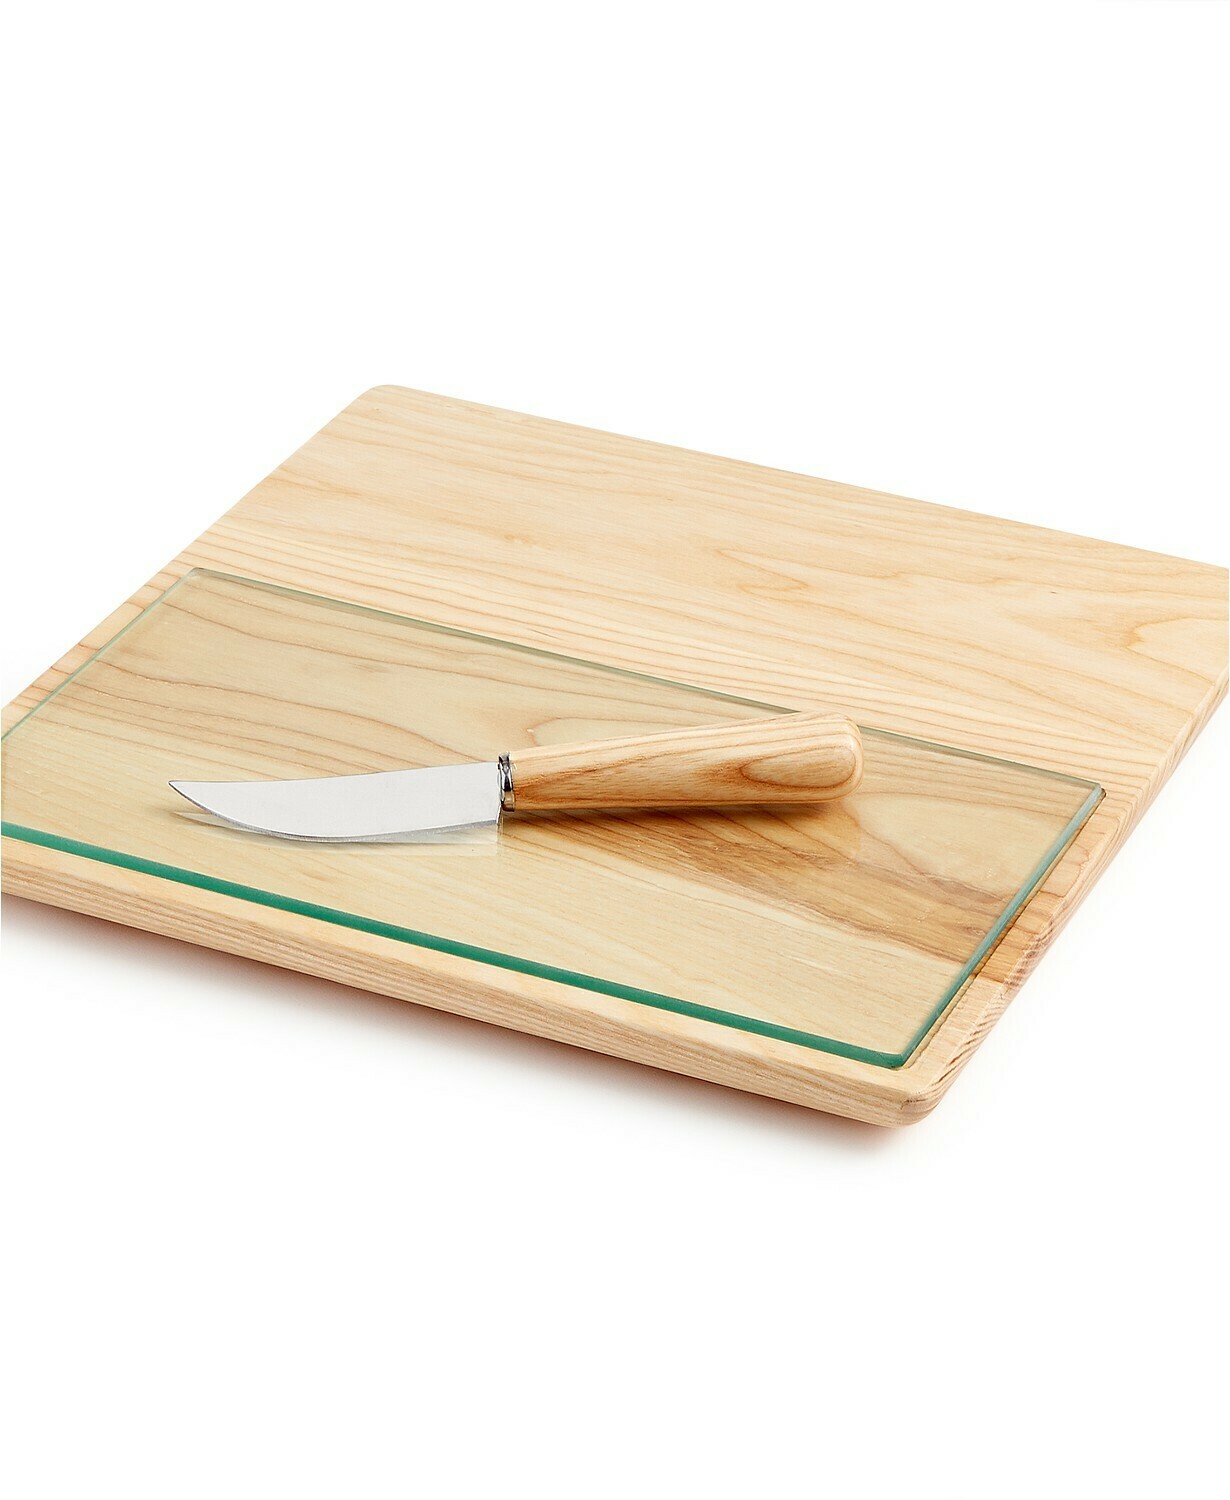 Hotel Collection Wood & Glass 3-Pc. Cheeseboard Set